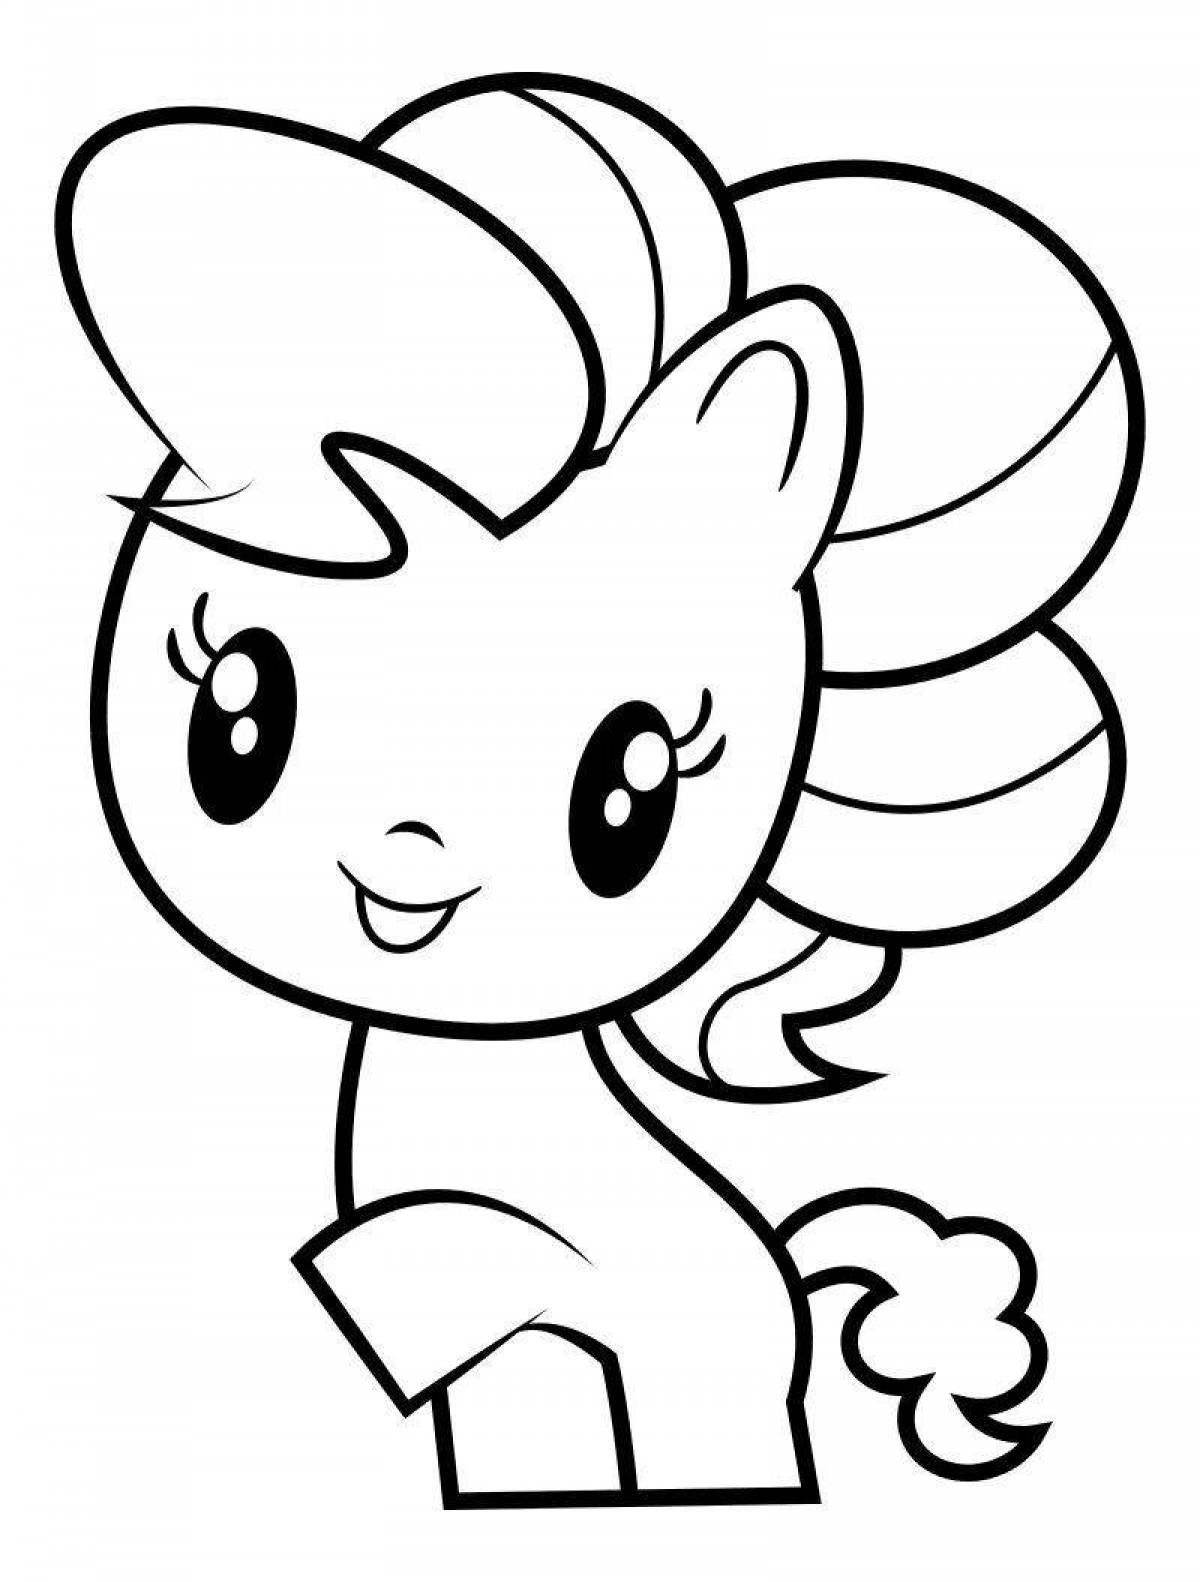 Wonderful cute pony coloring for kids